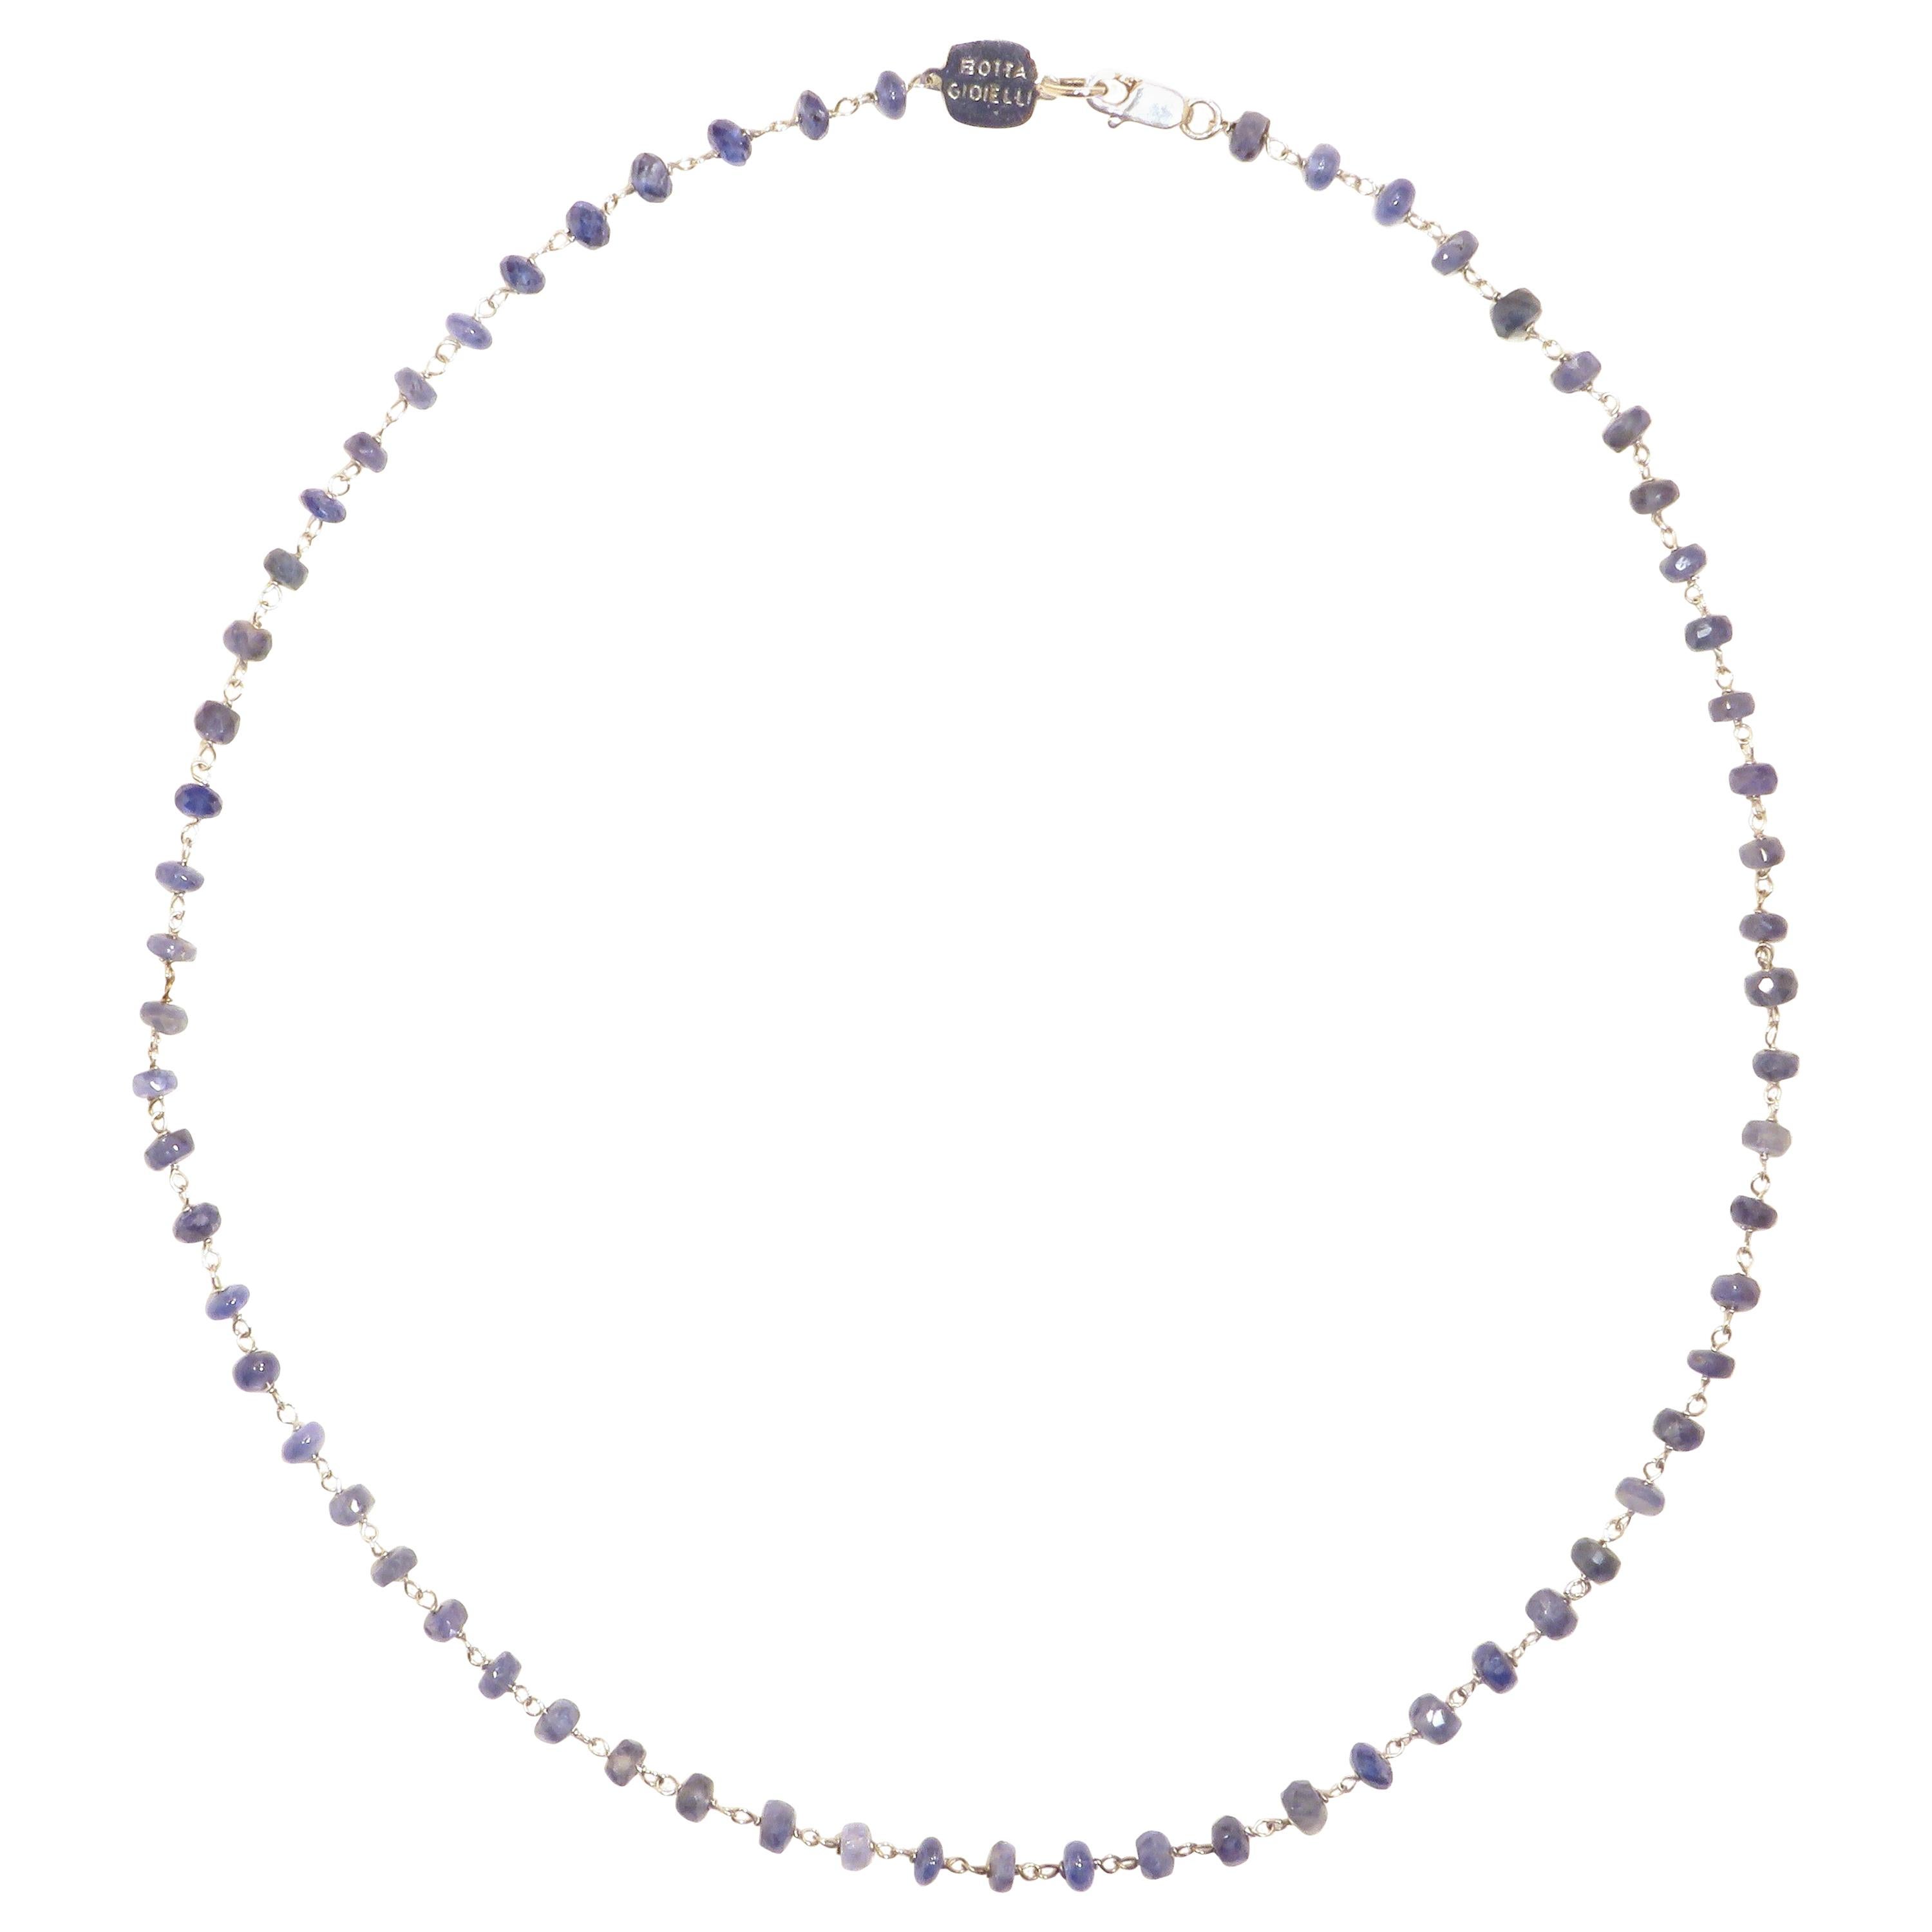 Sapphire White Gold Necklace Handcrafted in Italy by Botta Gioielli